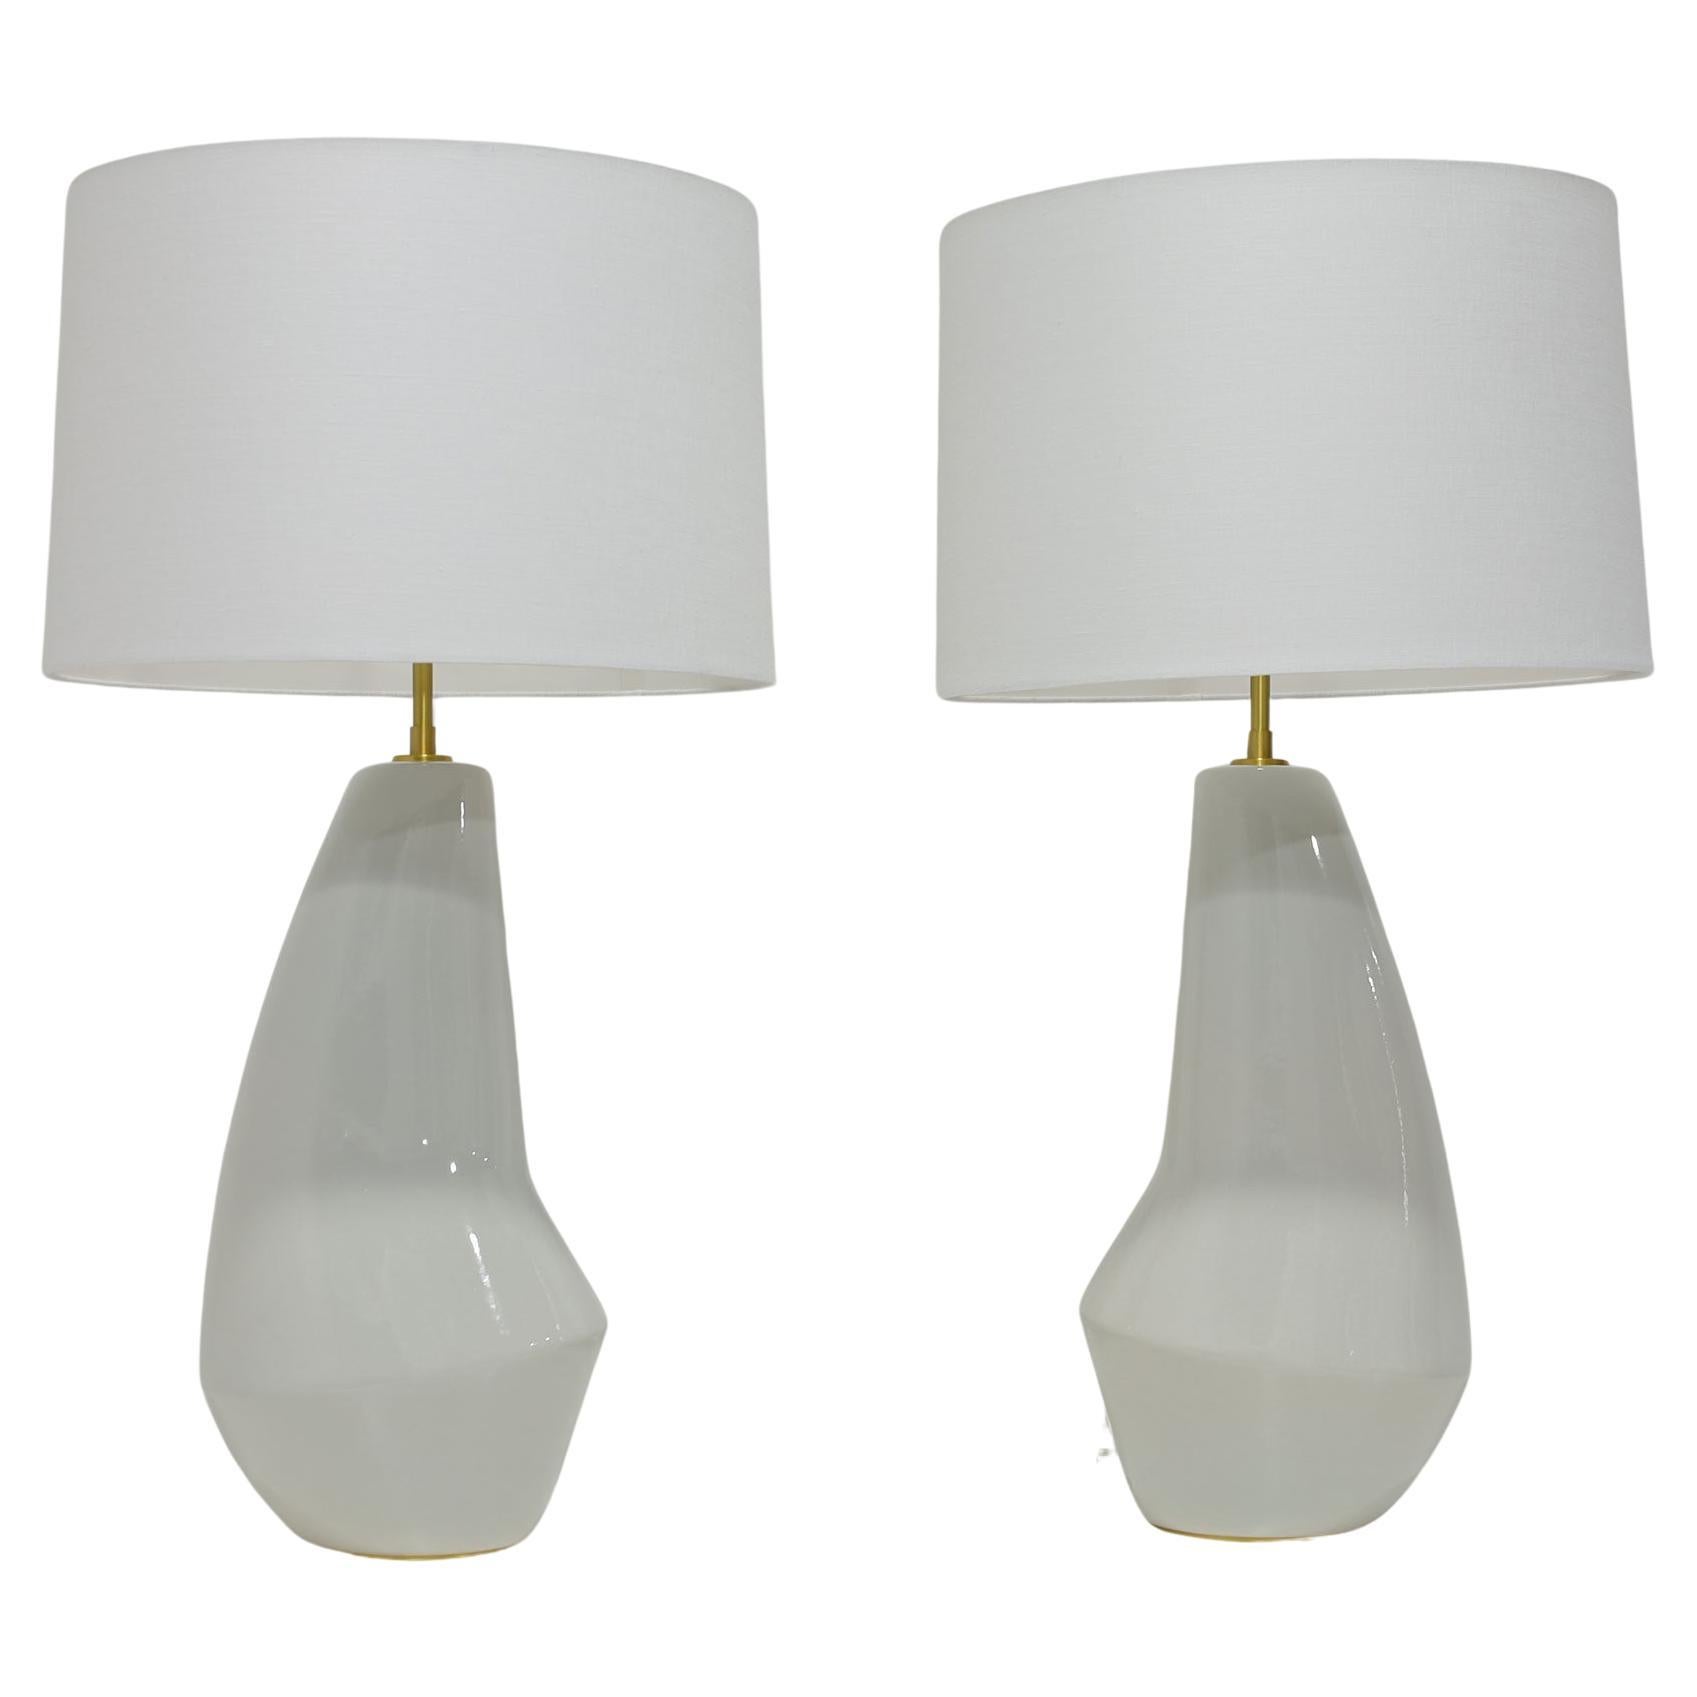 Pair of Contour Artic White Ceramic Table Lamps by Kelly Wearstler For Sale